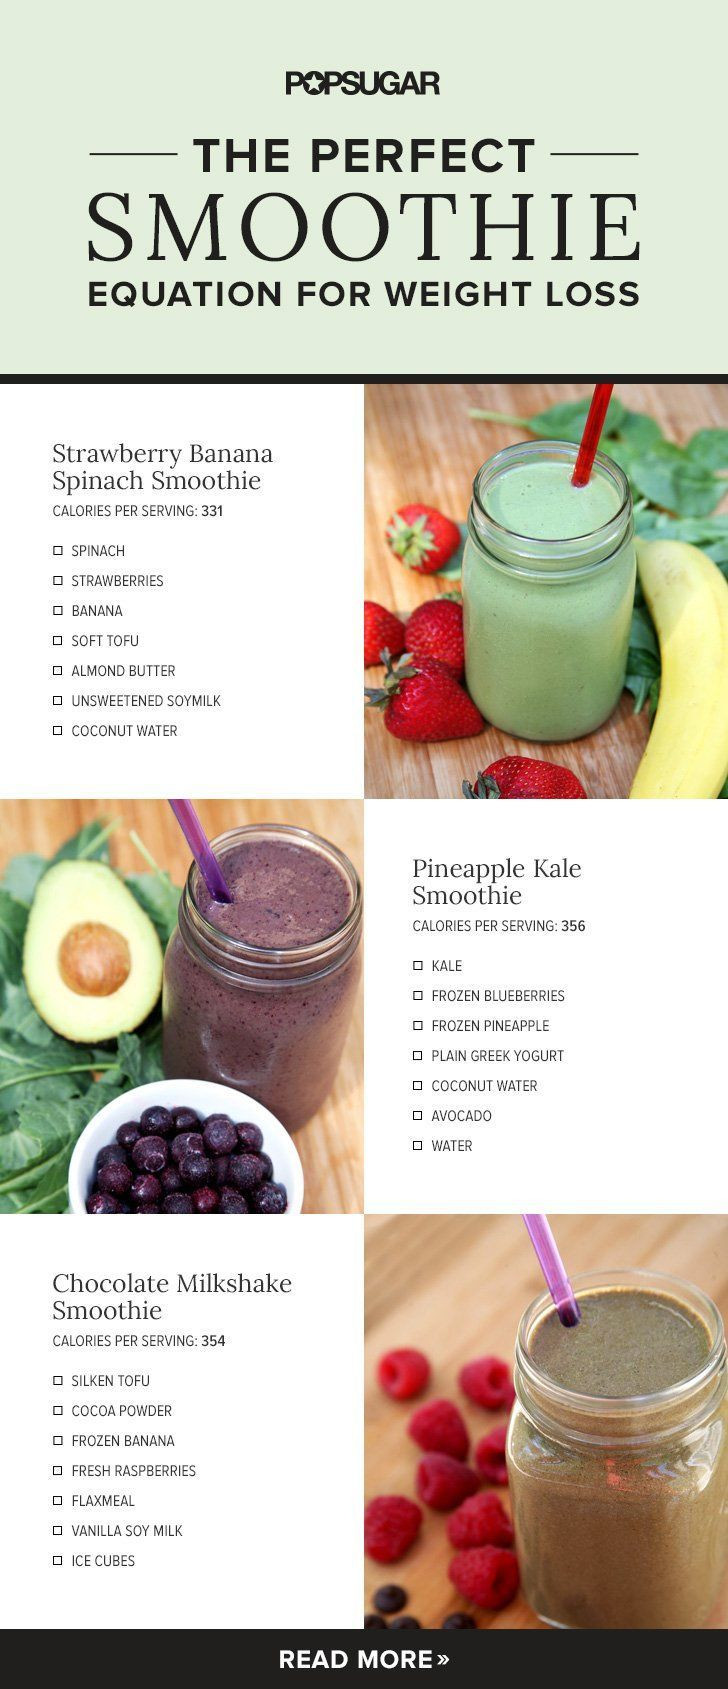 Breakfast Smoothies Healthy
 If You Want to Lose Weight This Is the Smoothie Formula